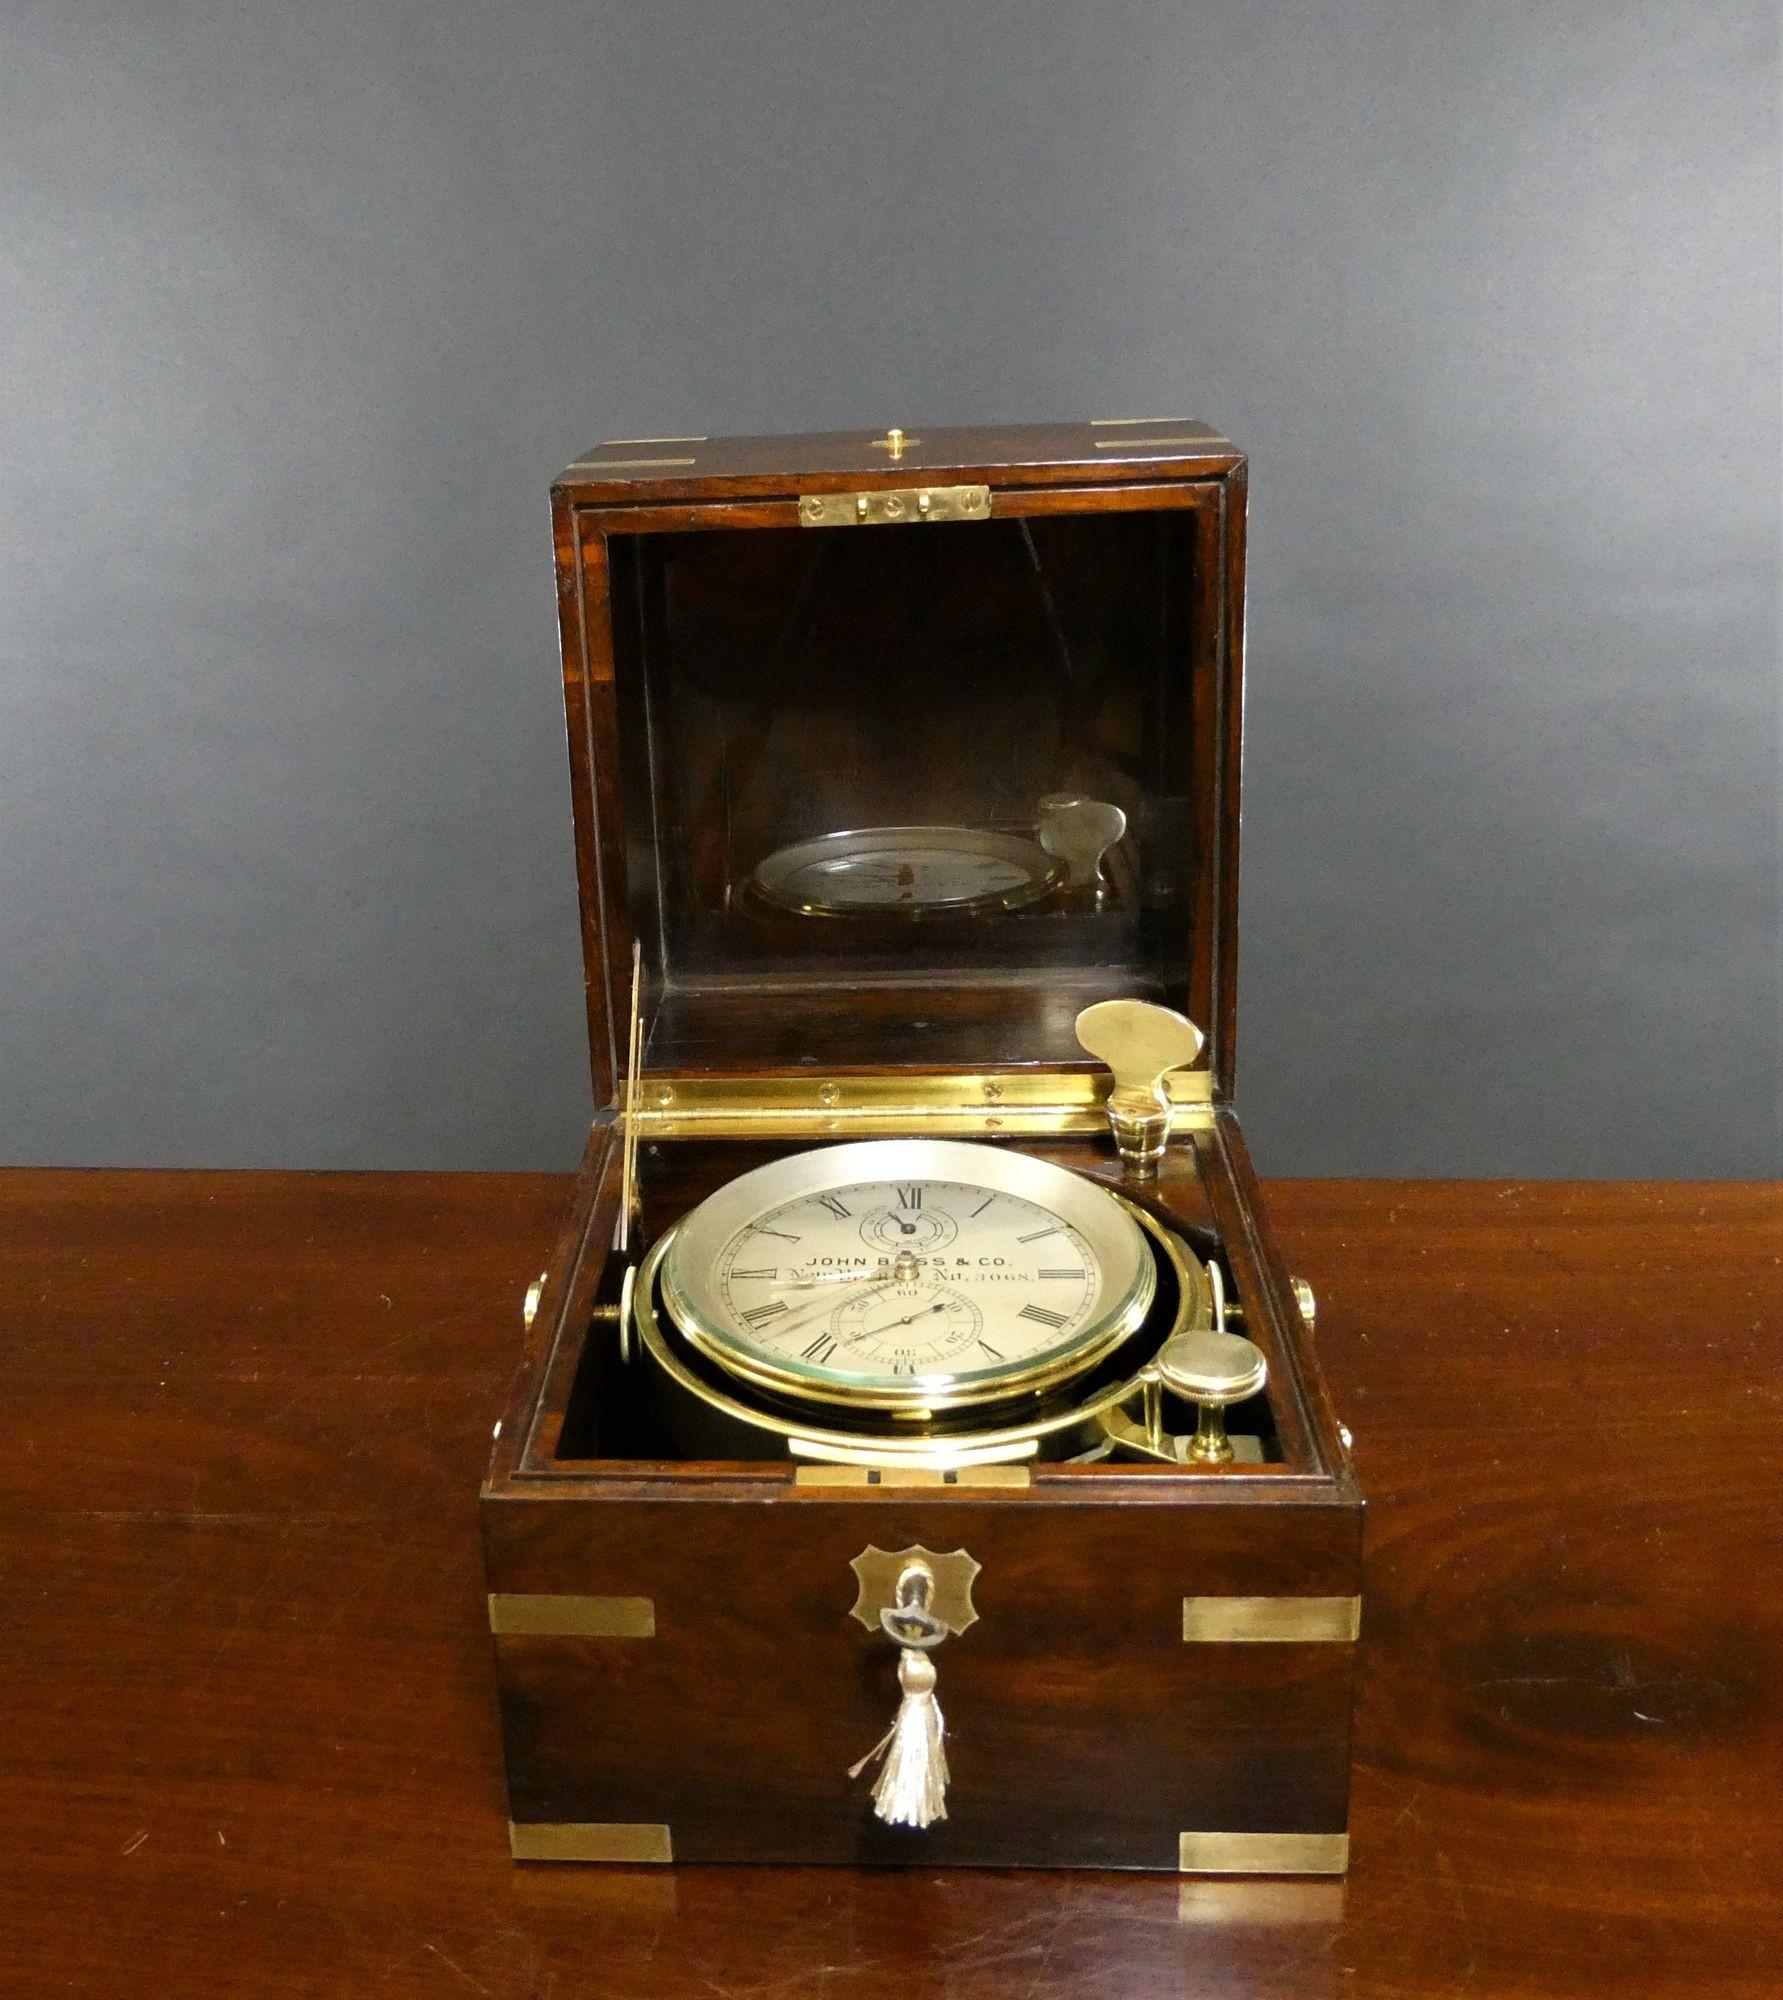 A Fine Two Day Marine Chronometer by John Bliss and Co, New York. No.3068
 
Two day marine chronometer by John Bliss & Co housed in a beautiful three tier rosewood brass bound box with brass carrying handles to the sides, brass push button knob